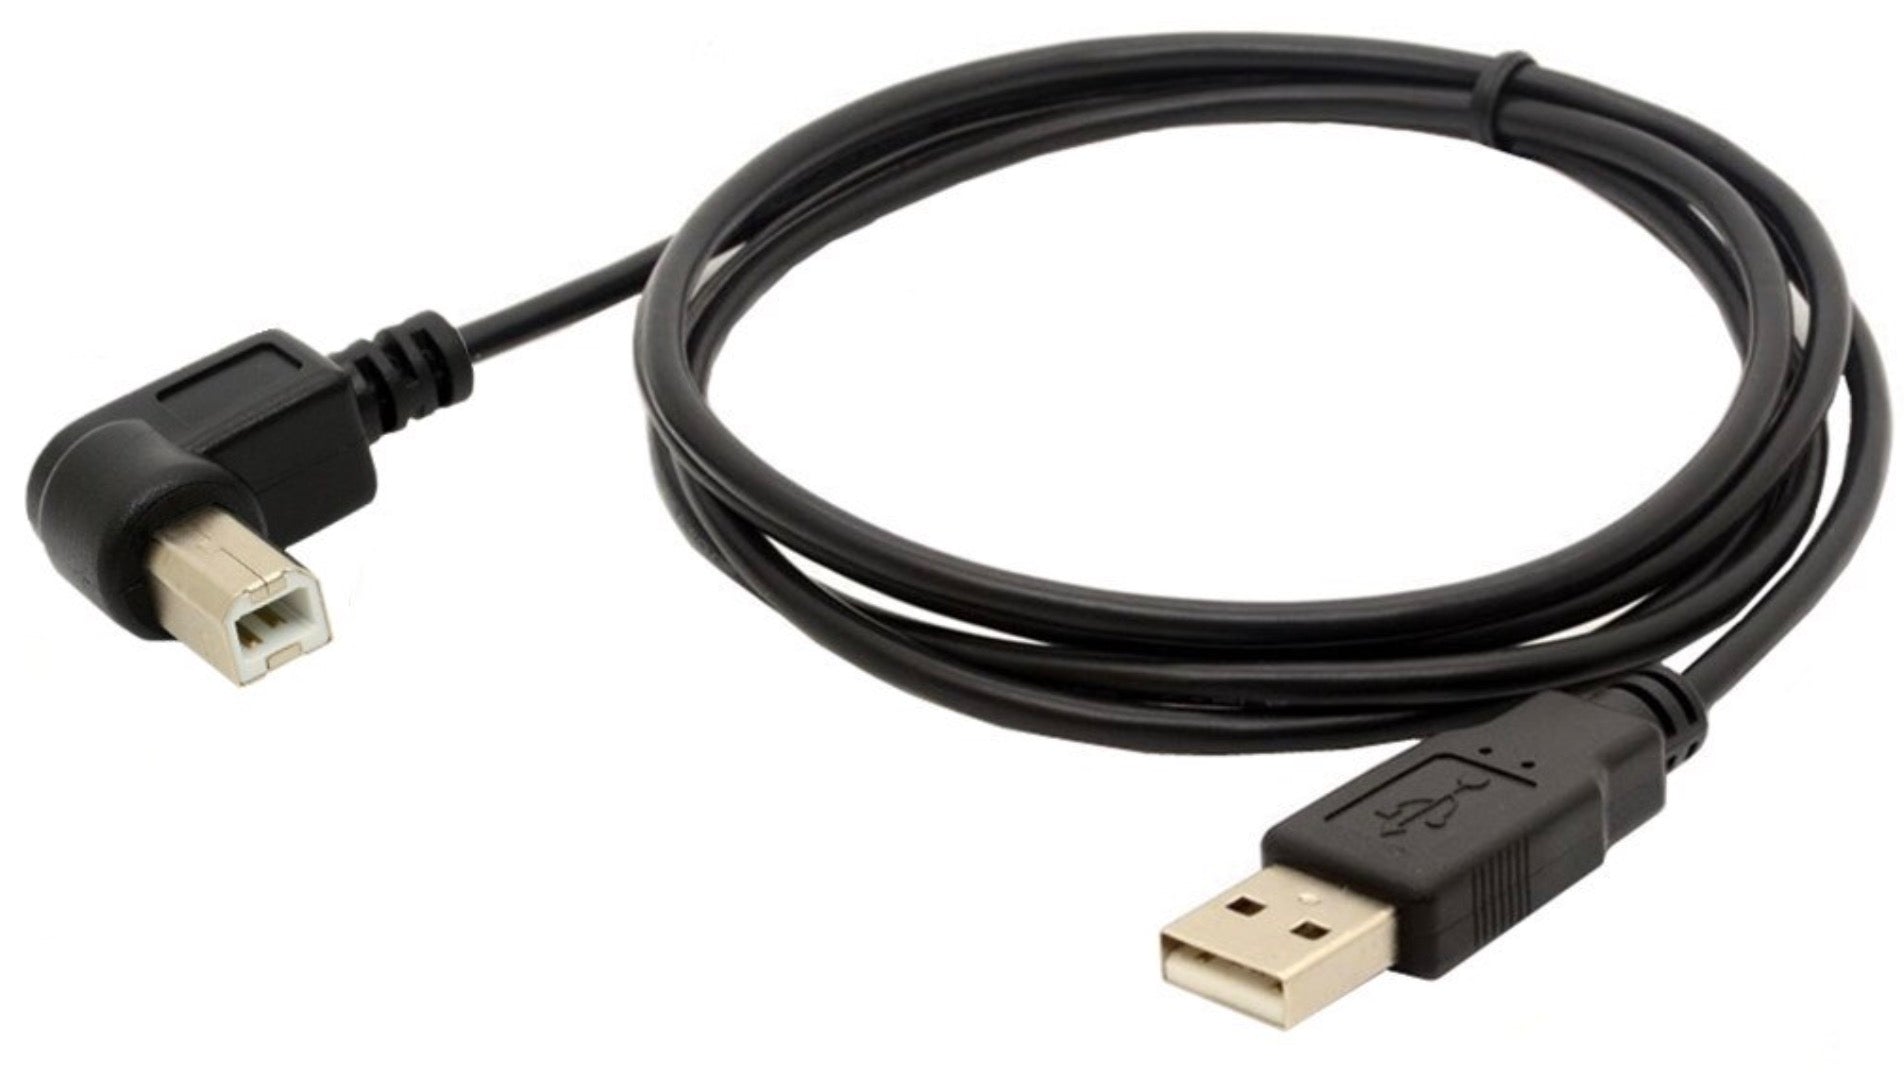 USB 2.0 Type A Male to Type B Male 90 Degree Angled Printer Scanner Cable 1.5m